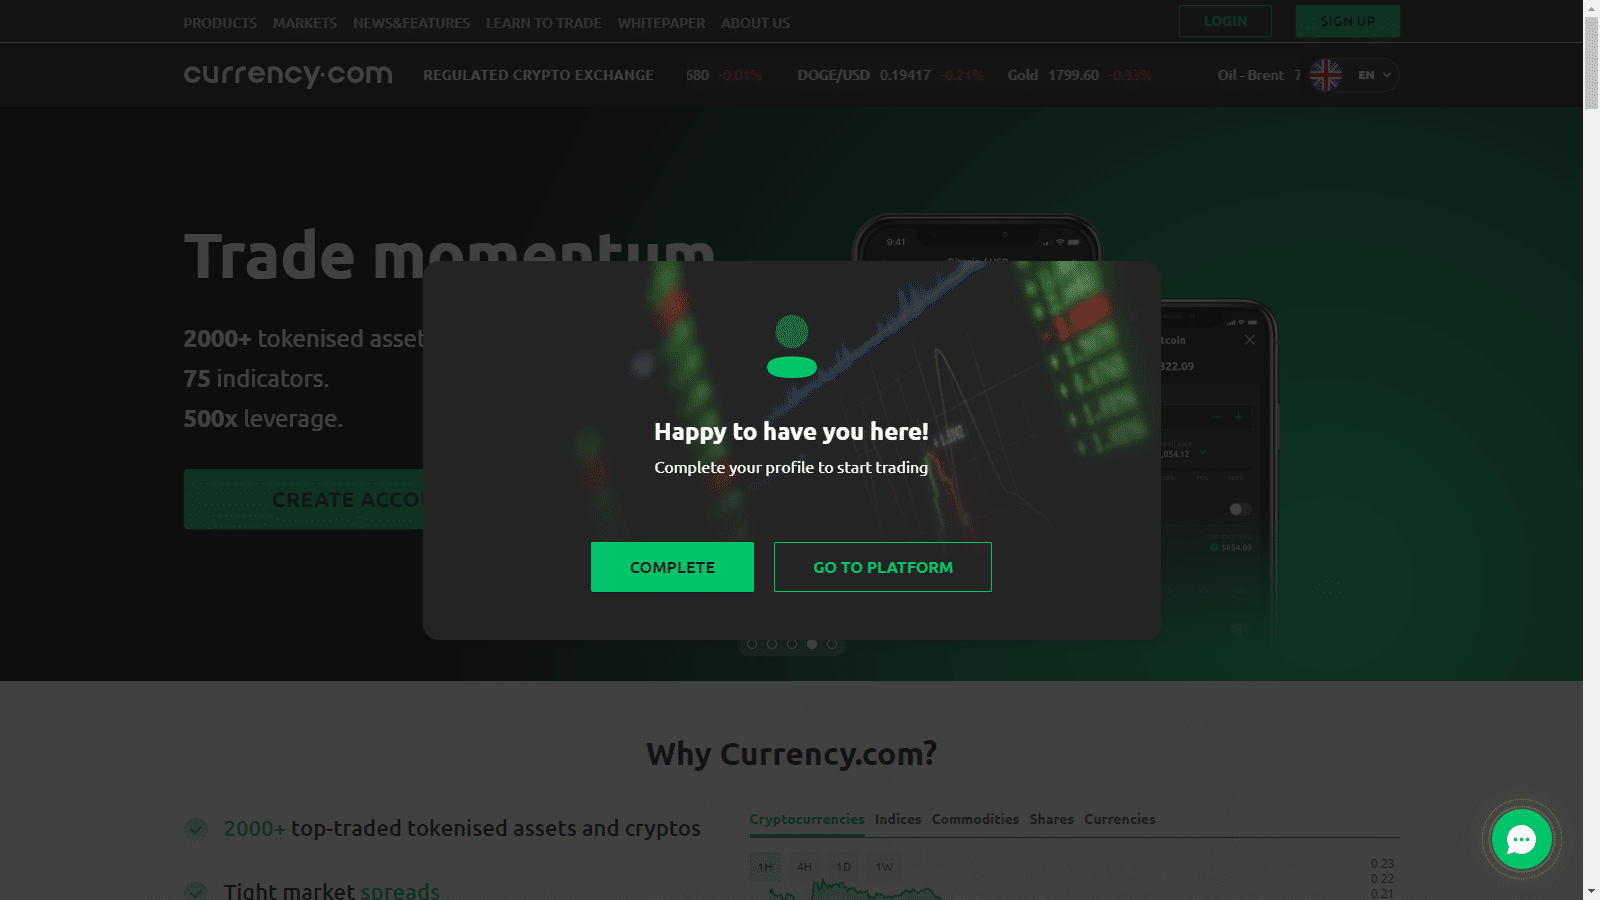 Currency.com Complete